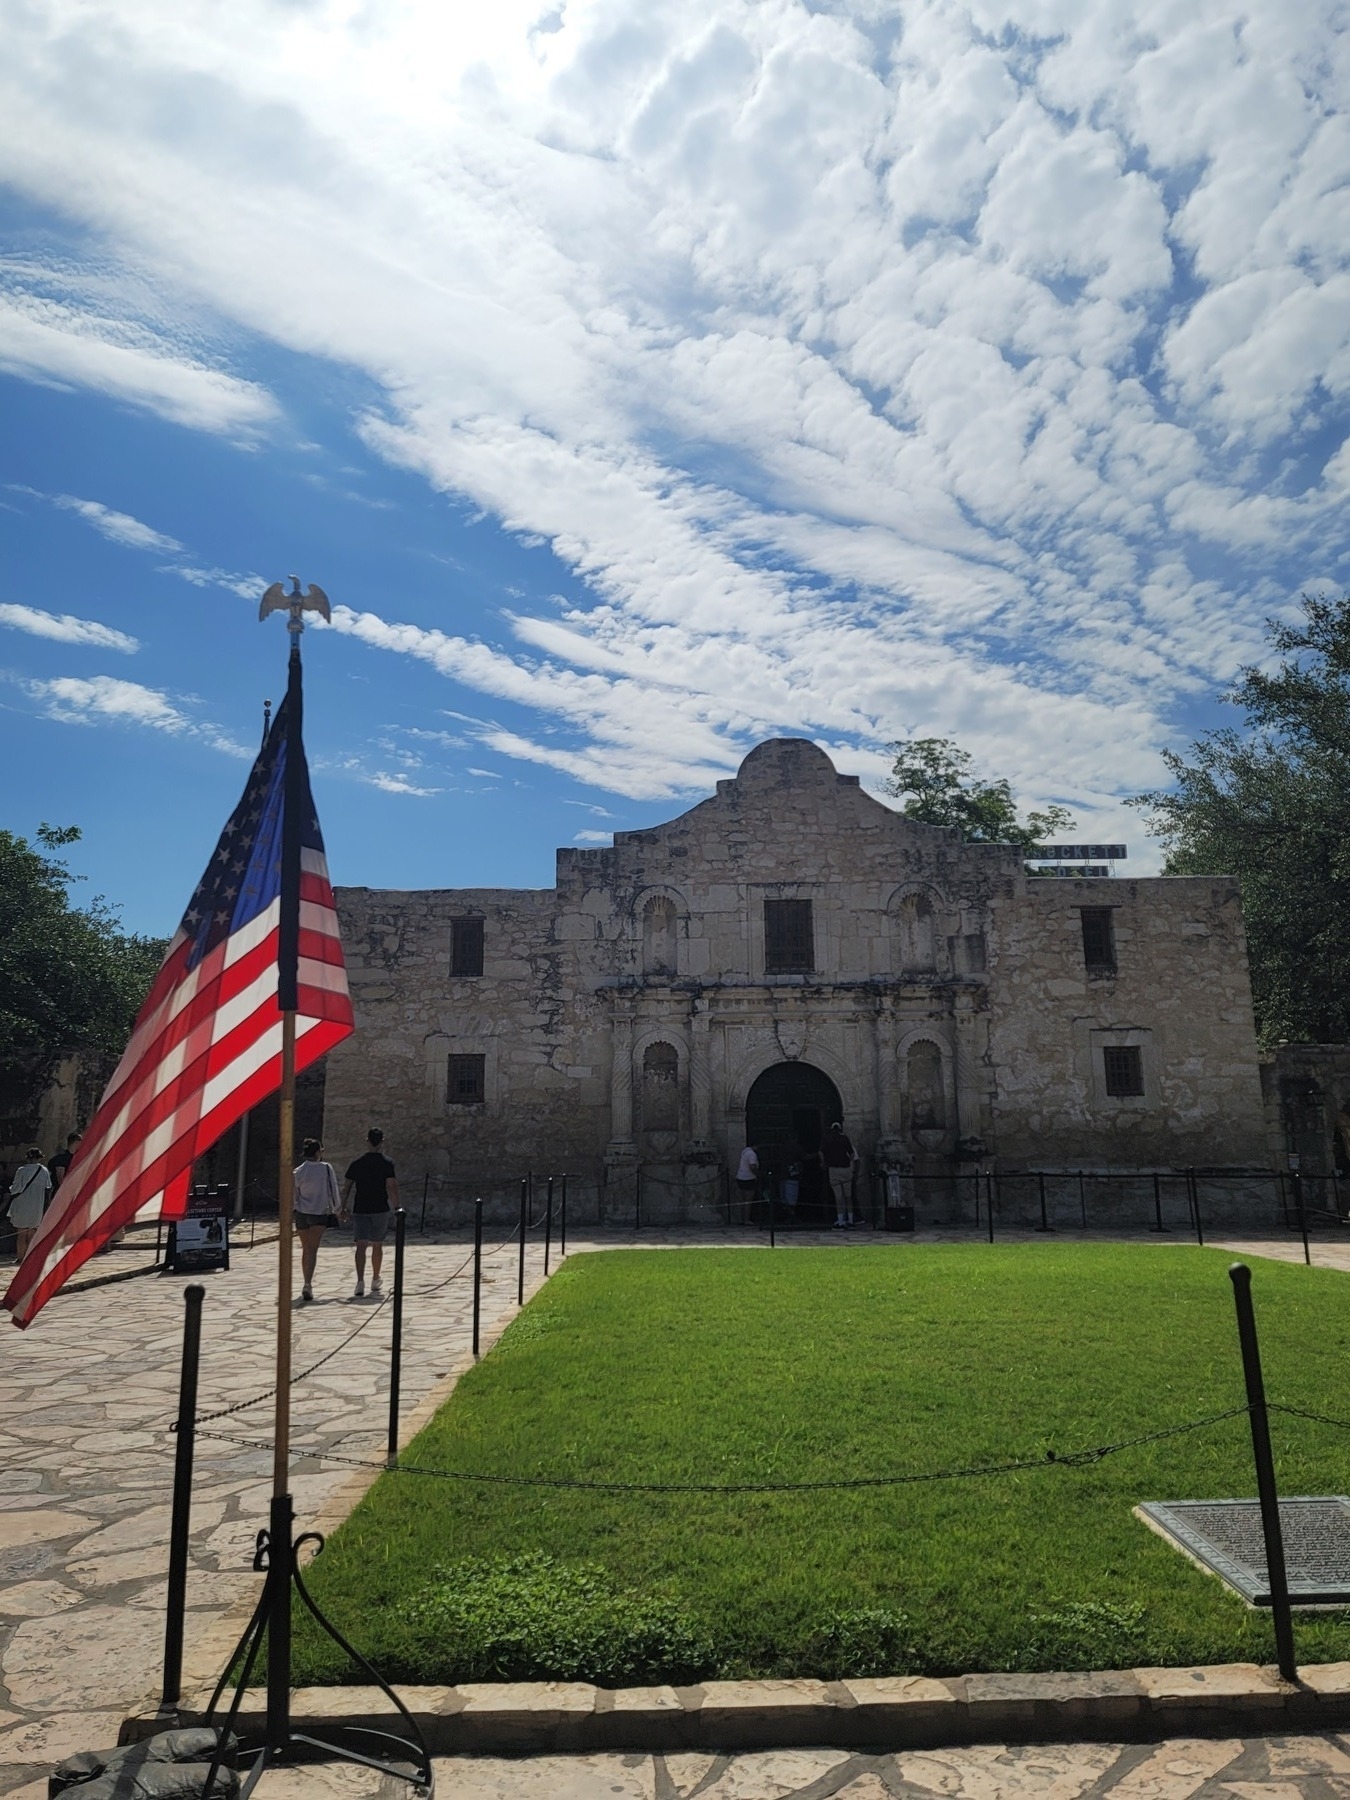 entrance to the Alamo with a small green lawn in front and a blue sky with white clouds